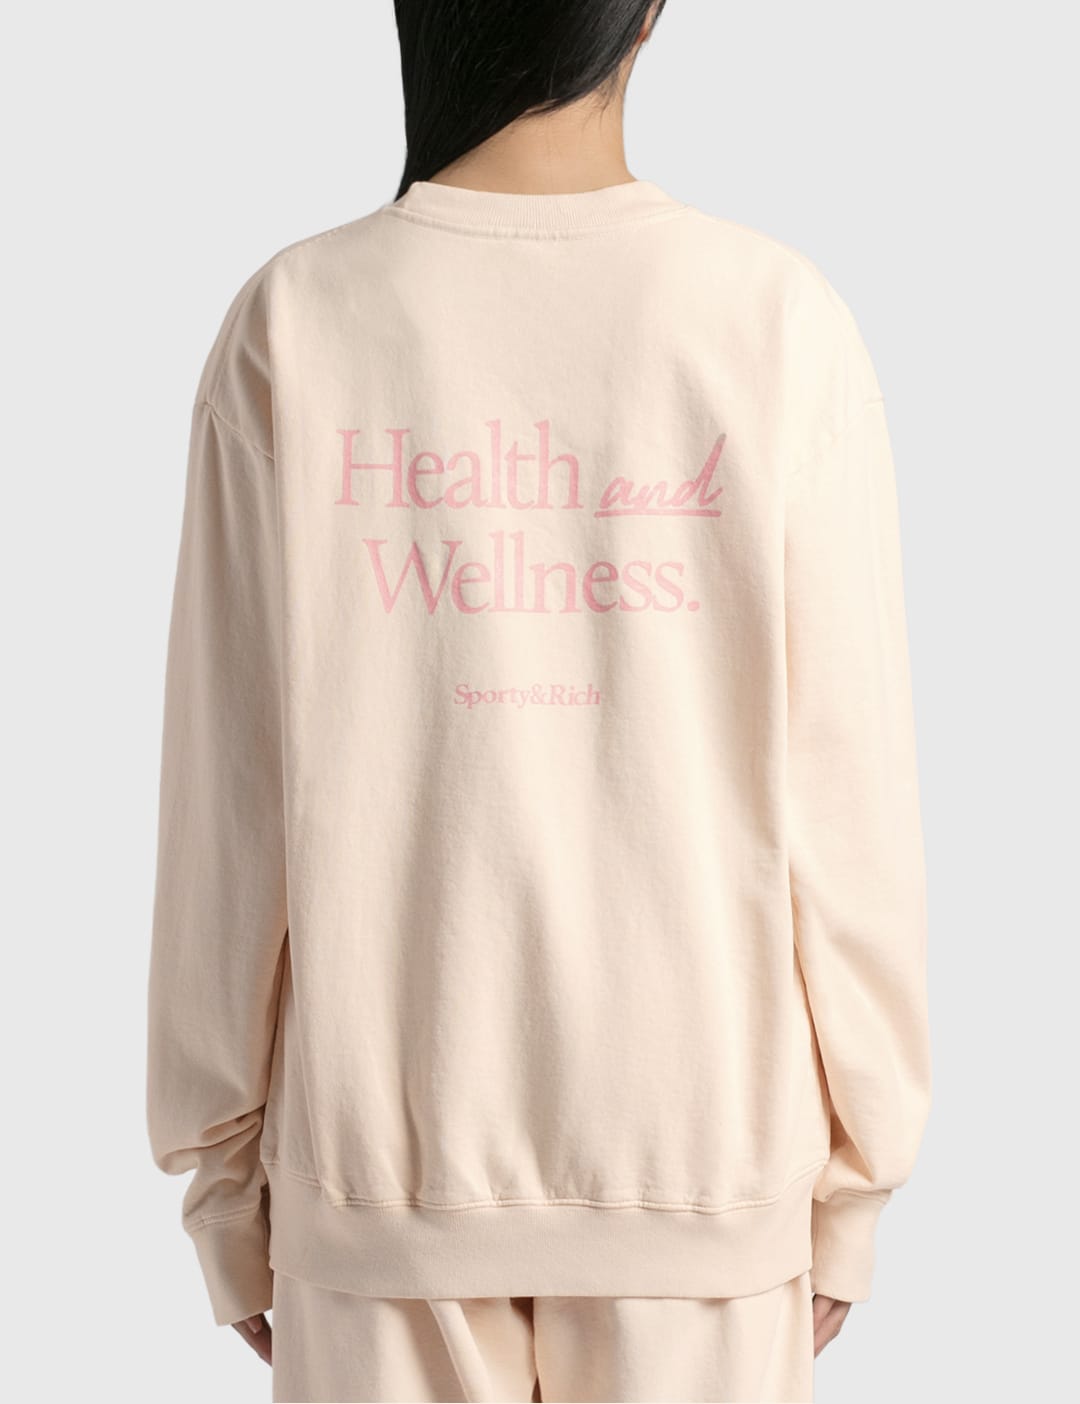 Sporty & Rich - New Health Crewneck | HBX - Globally Curated